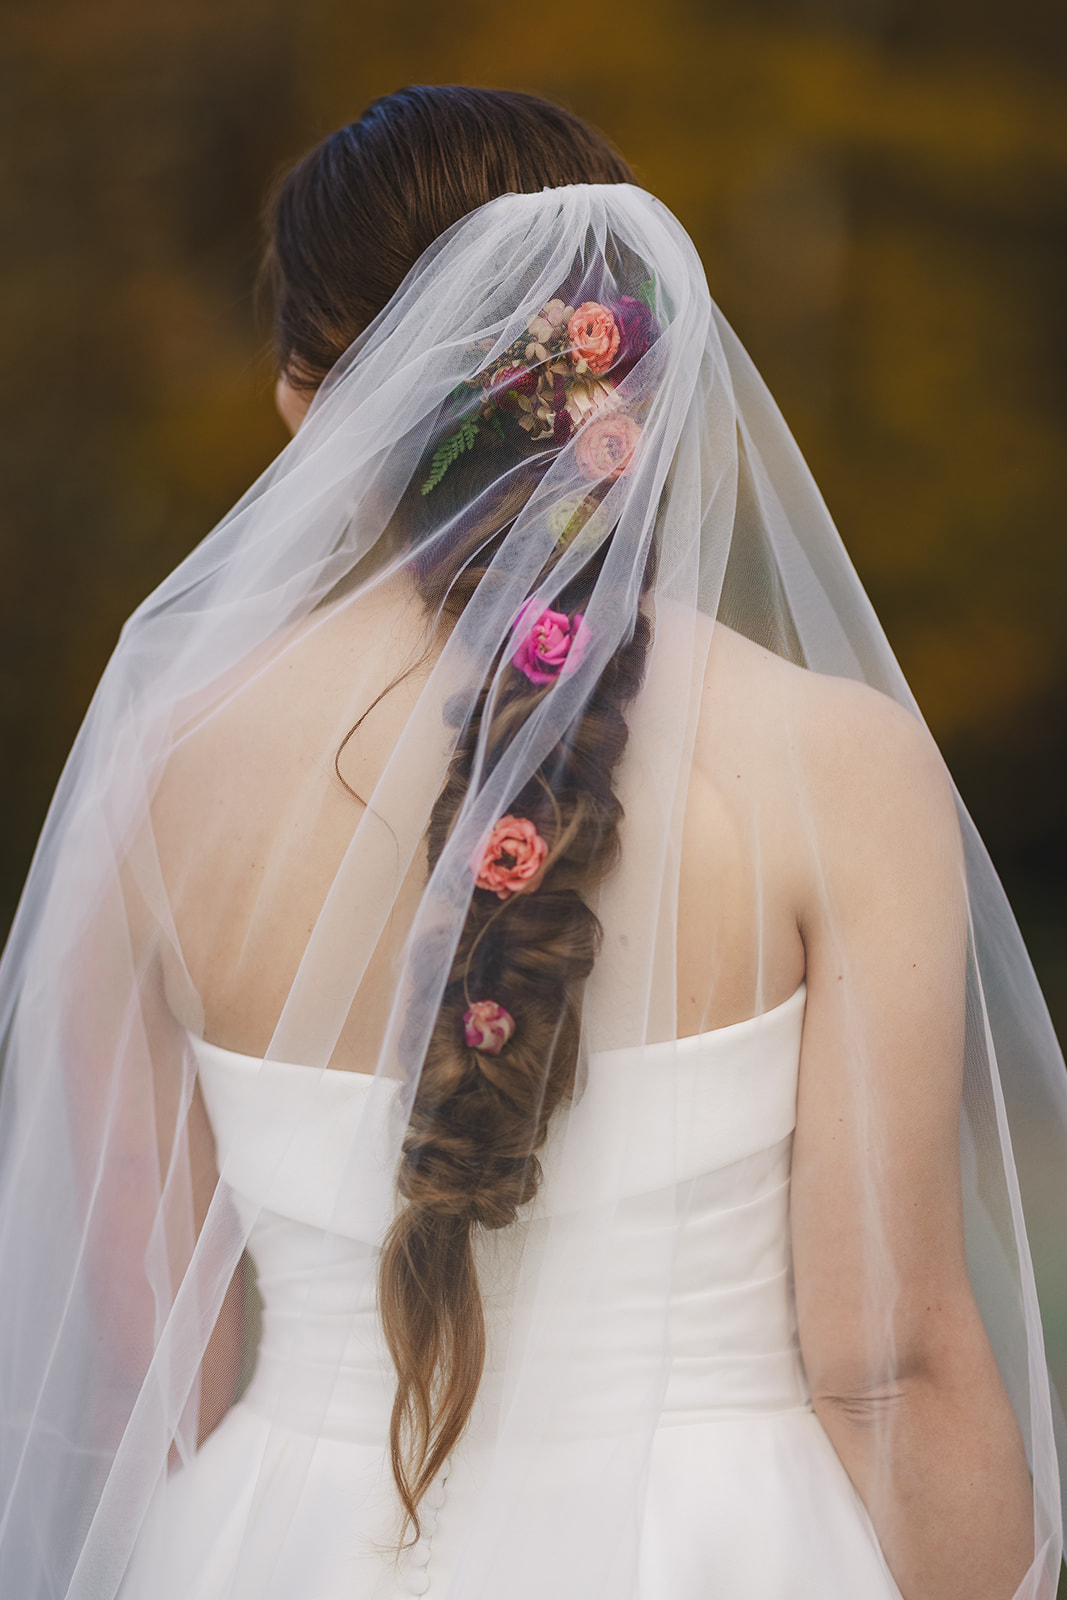 a close up of a bride's braided hair with flowers and veil